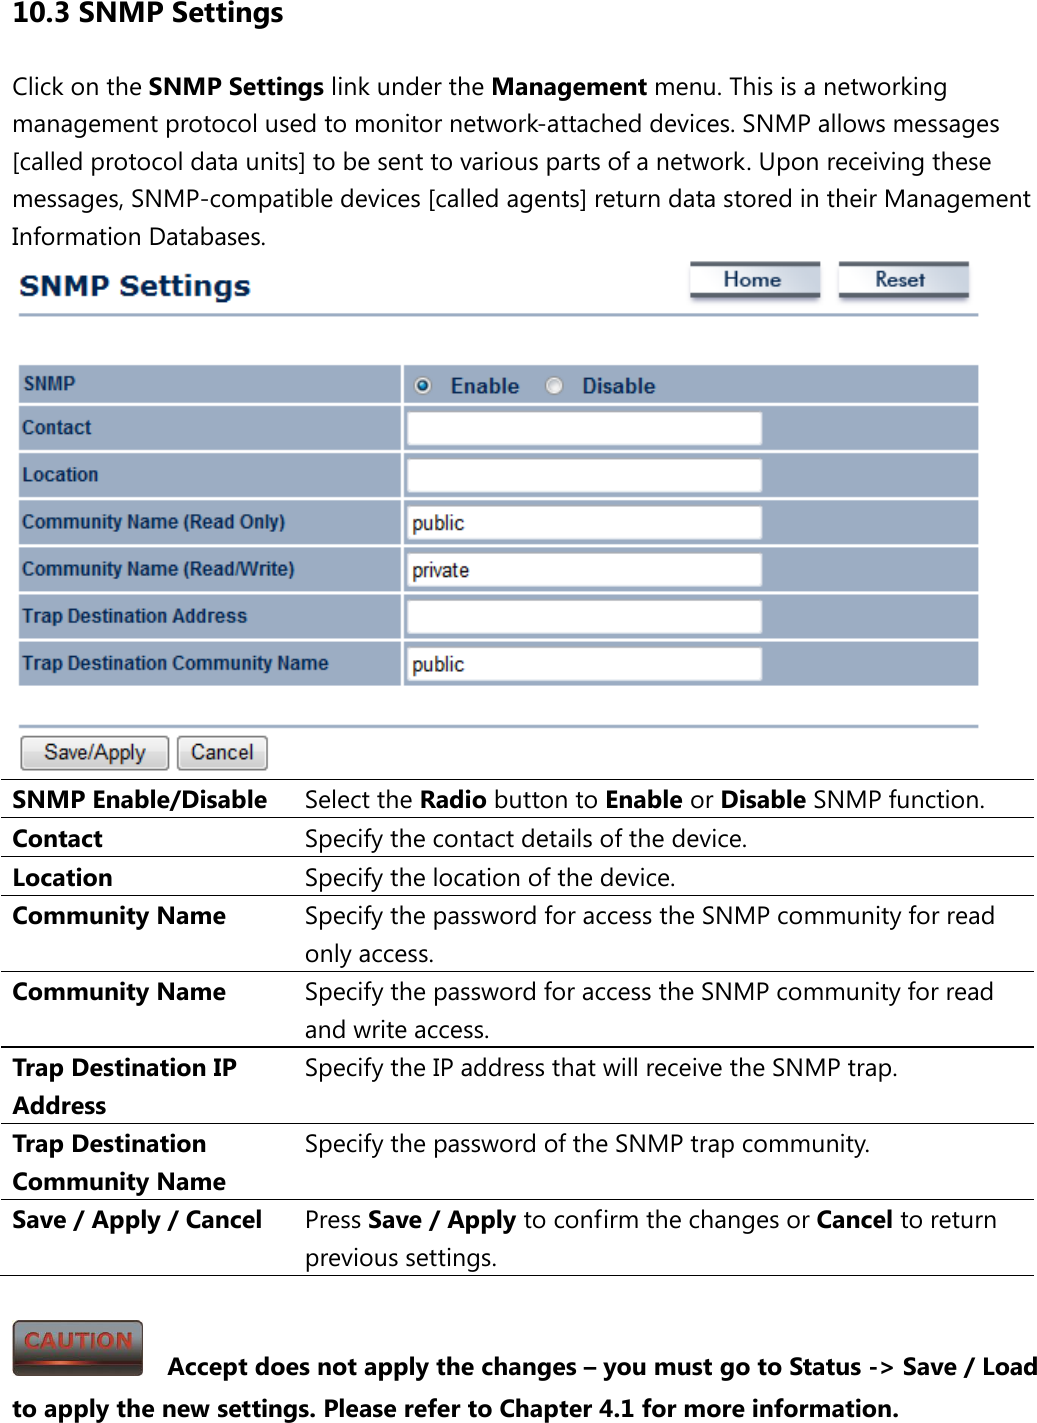 10.3 SNMP Settings Click on the SNMP Settings link under the Management menu. This is a networking management protocol used to monitor network-attached devices. SNMP allows messages [called protocol data units] to be sent to various parts of a network. Upon receiving these messages, SNMP-compatible devices [called agents] return data stored in their Management Information Databases.  SNMP Enable/Disable Select the Radio button to Enable or Disable SNMP function. Contact Specify the contact details of the device. Location Specify the location of the device. Community Name Specify the password for access the SNMP community for read only access. Community Name Specify the password for access the SNMP community for read and write access. Trap Destination IP Address Specify the IP address that will receive the SNMP trap. Trap Destination Community Name Specify the password of the SNMP trap community. Save / Apply / Cancel Press Save / Apply to confirm the changes or Cancel to return previous settings.    Accept does not apply the changes – you must go to Status -&gt; Save / Load to apply the new settings. Please refer to Chapter 4.1 for more information. 